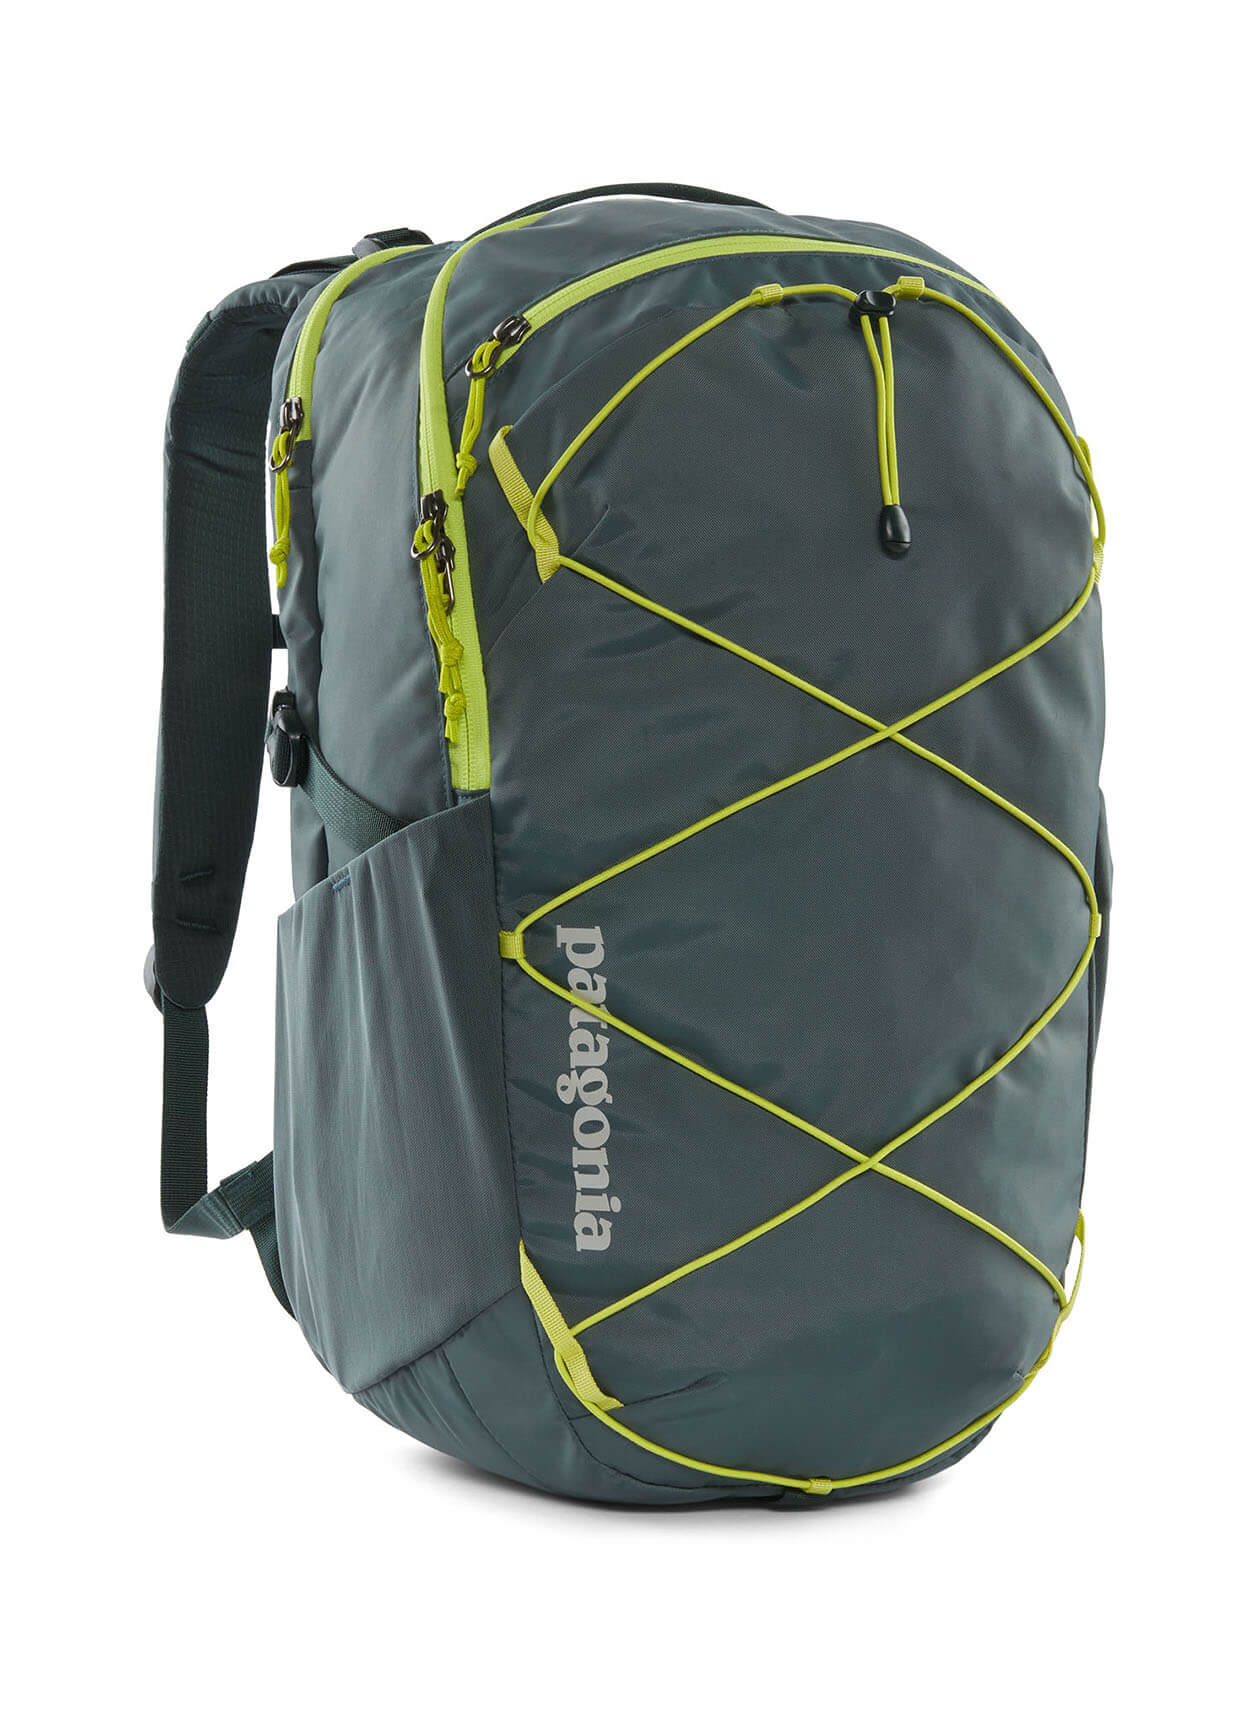 Patagonia Nouveau Green Refugio Daypack Backpack 30L